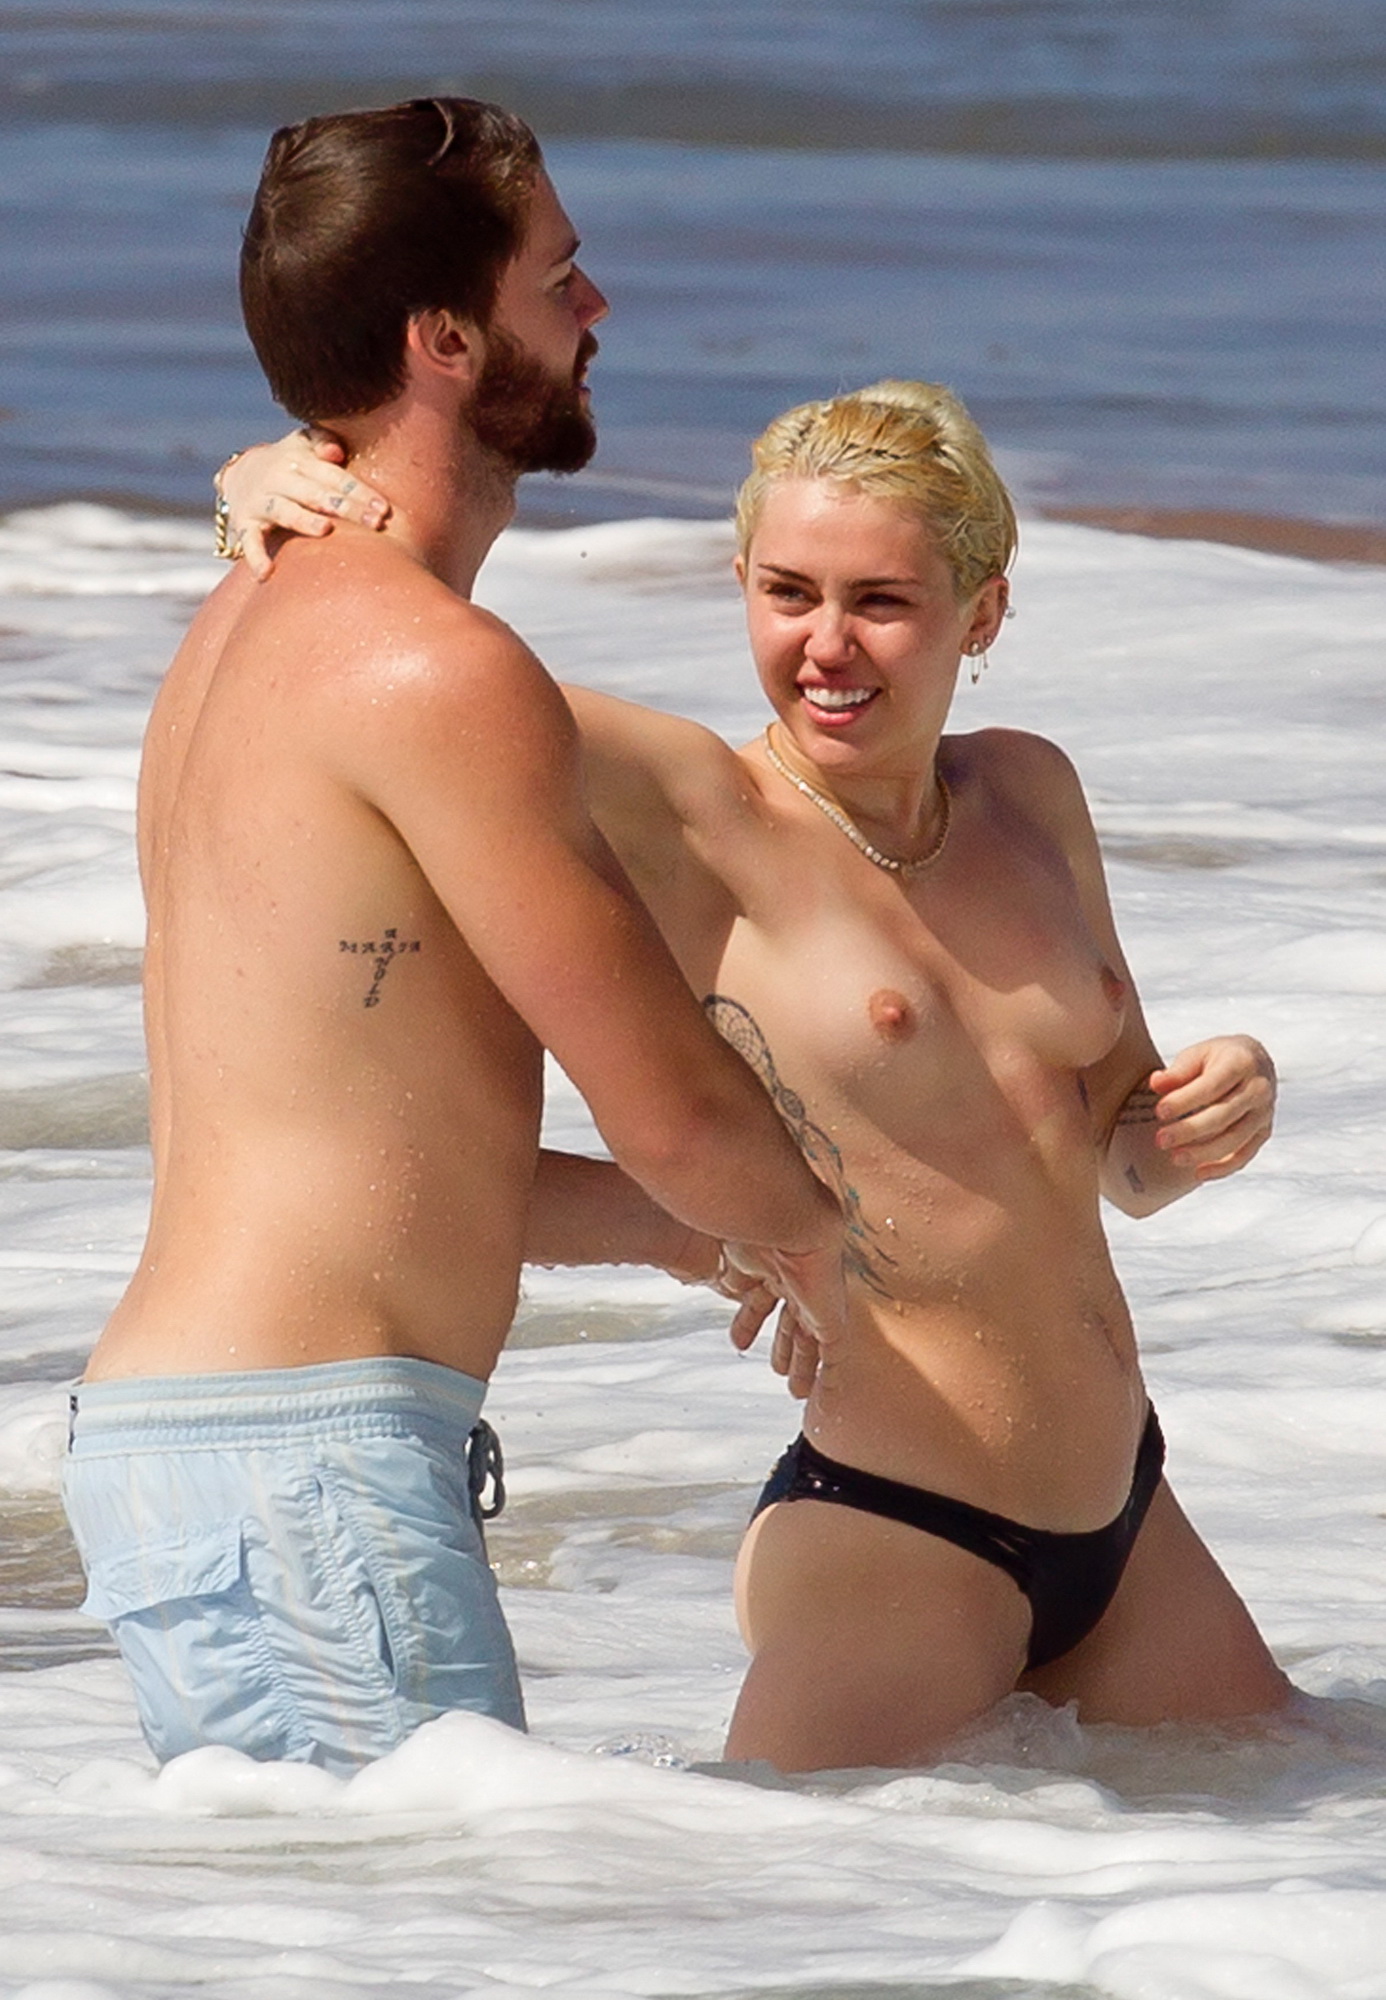 Miley-Cyrus-Topless-On-The-Beach-In-Hawaii-2  Celebrity -2805